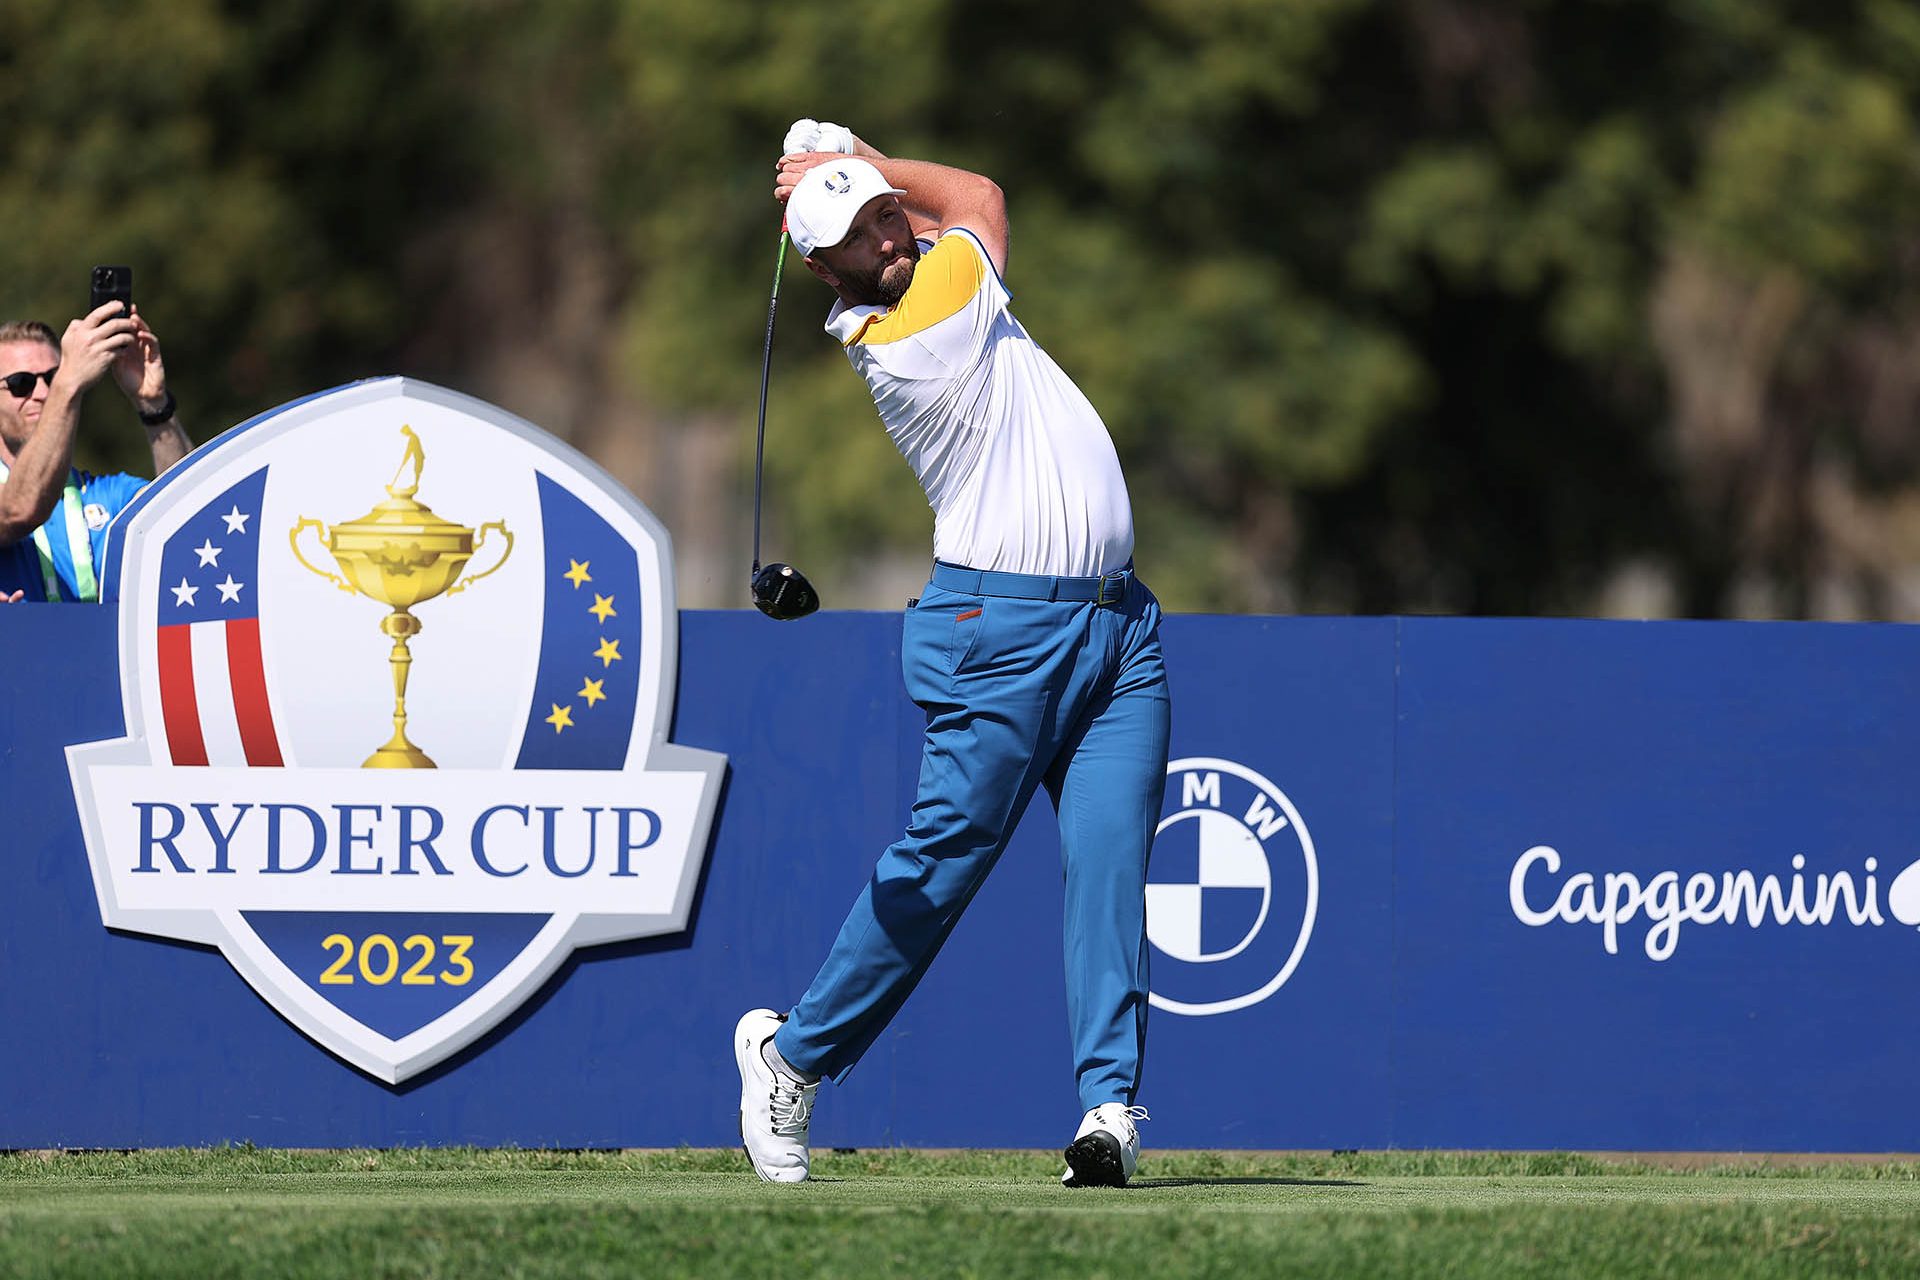 What will happen to the Ryder Cup?